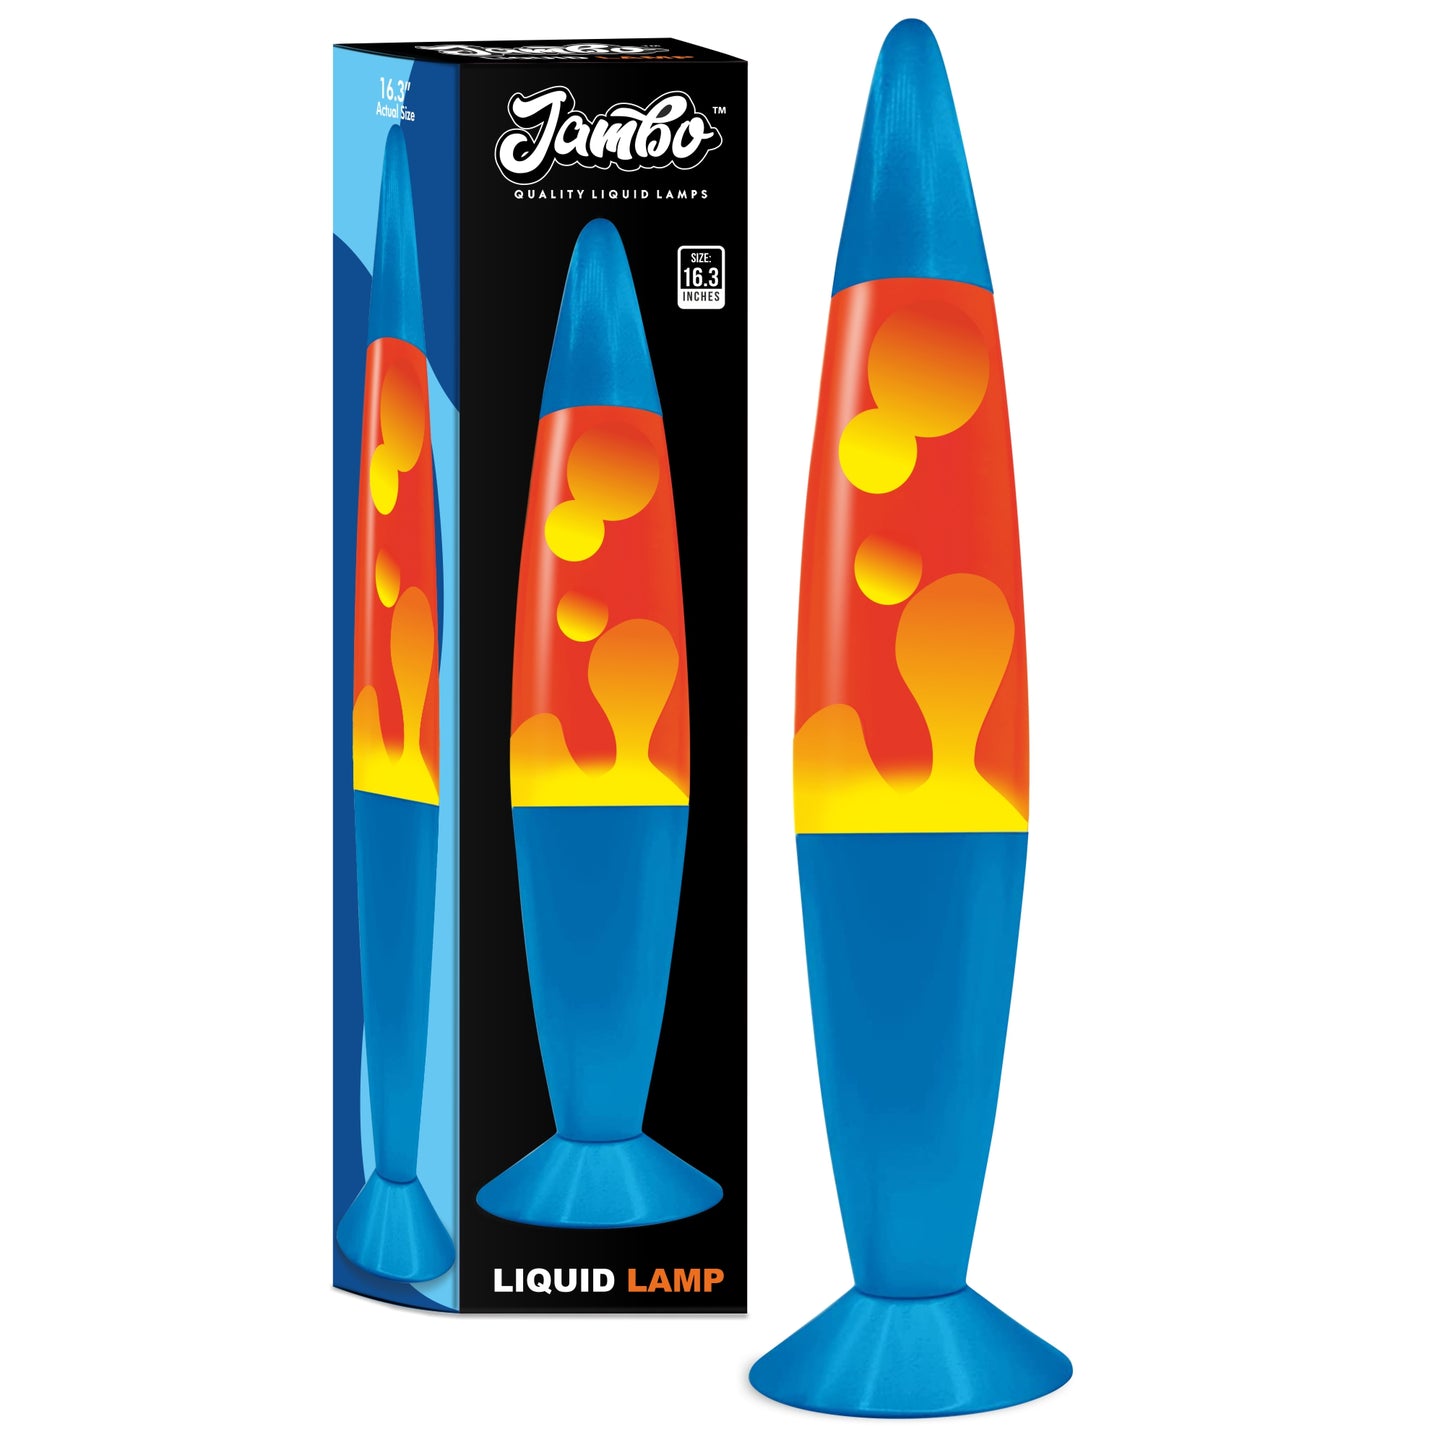 JAMBO 16" Liquid Lamp with Wax That Flows Like Lava, Cool Lamps, Relaxing and Entertaining, Nightlights Night Lights for Kids, Adults, Teens (16", Blue Base, Red Liquid, Orange Wax)